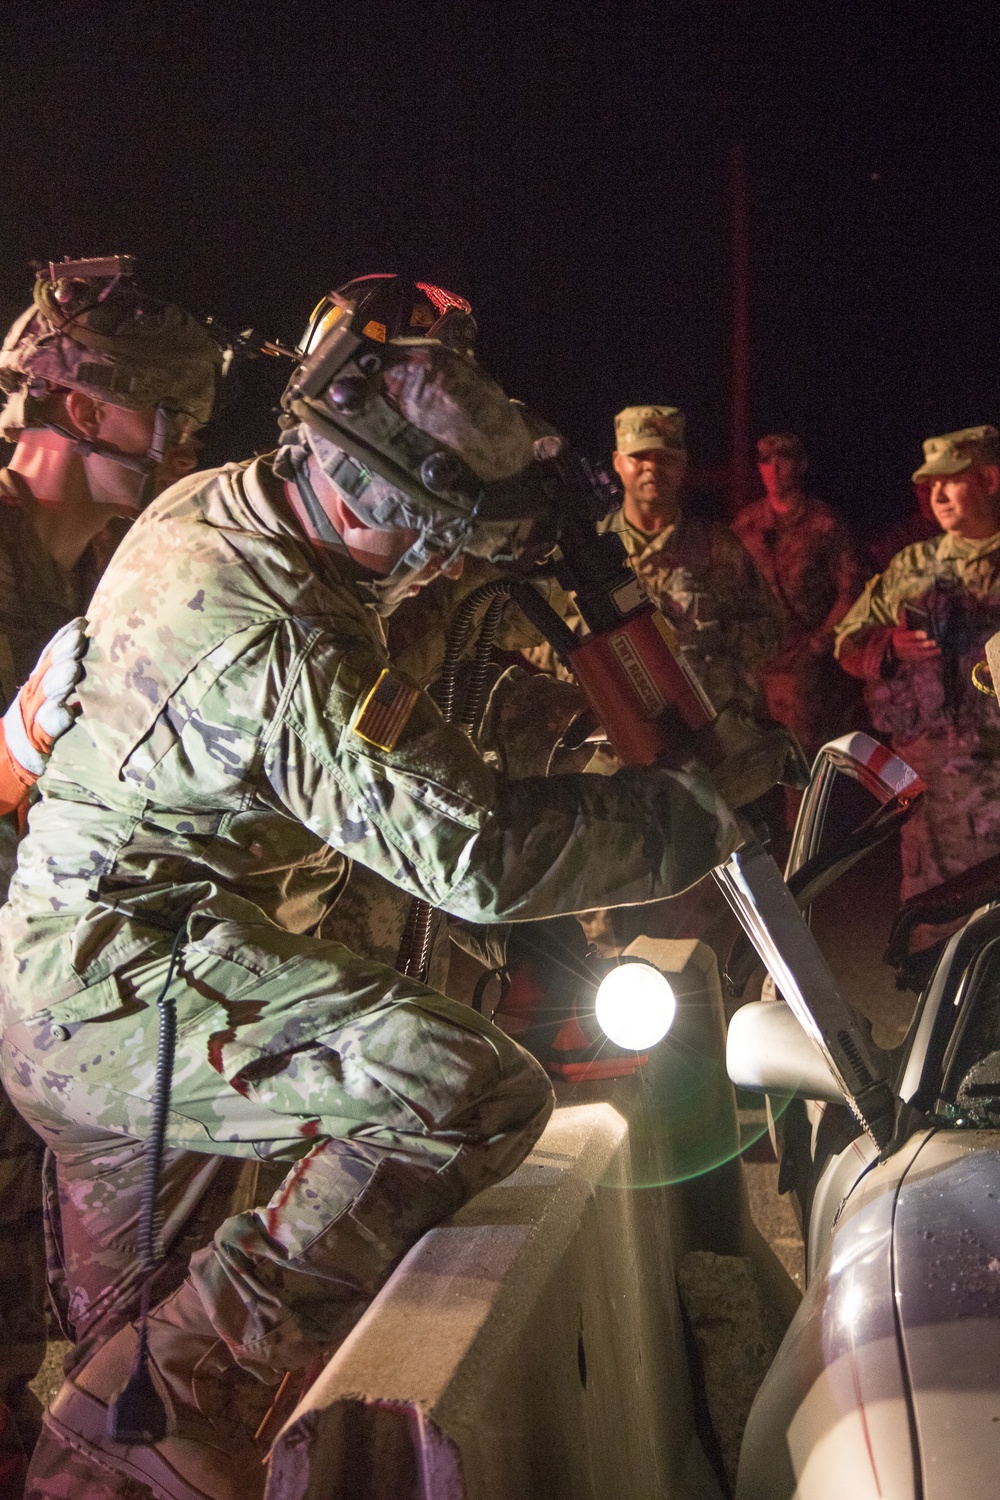 Soldiers perform vehicle extrication during training exercise